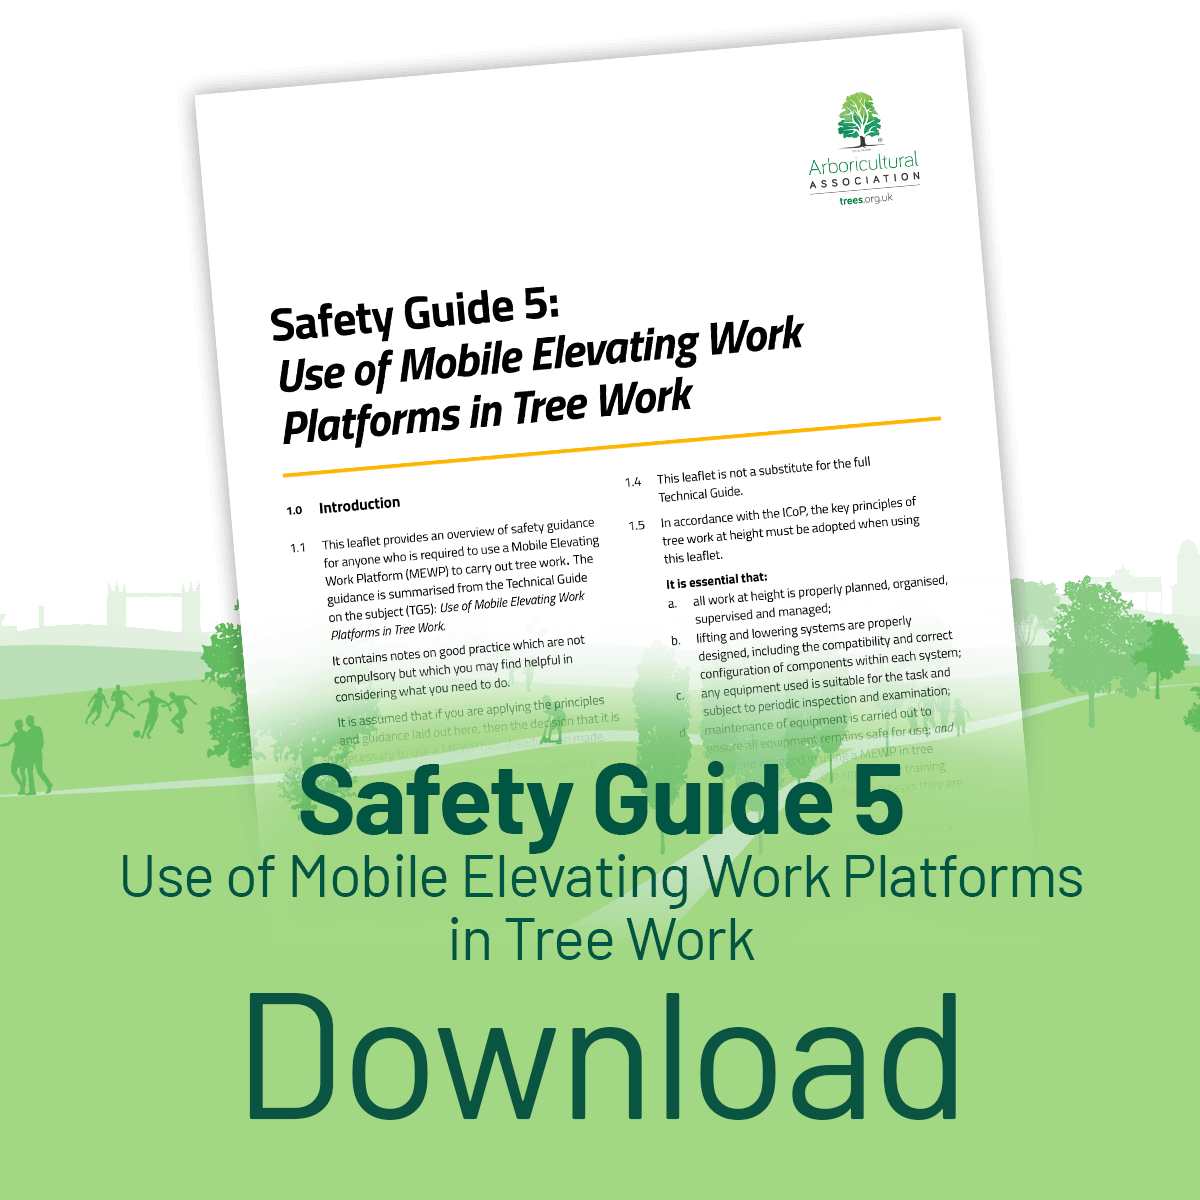 Download the Safety Guide 5